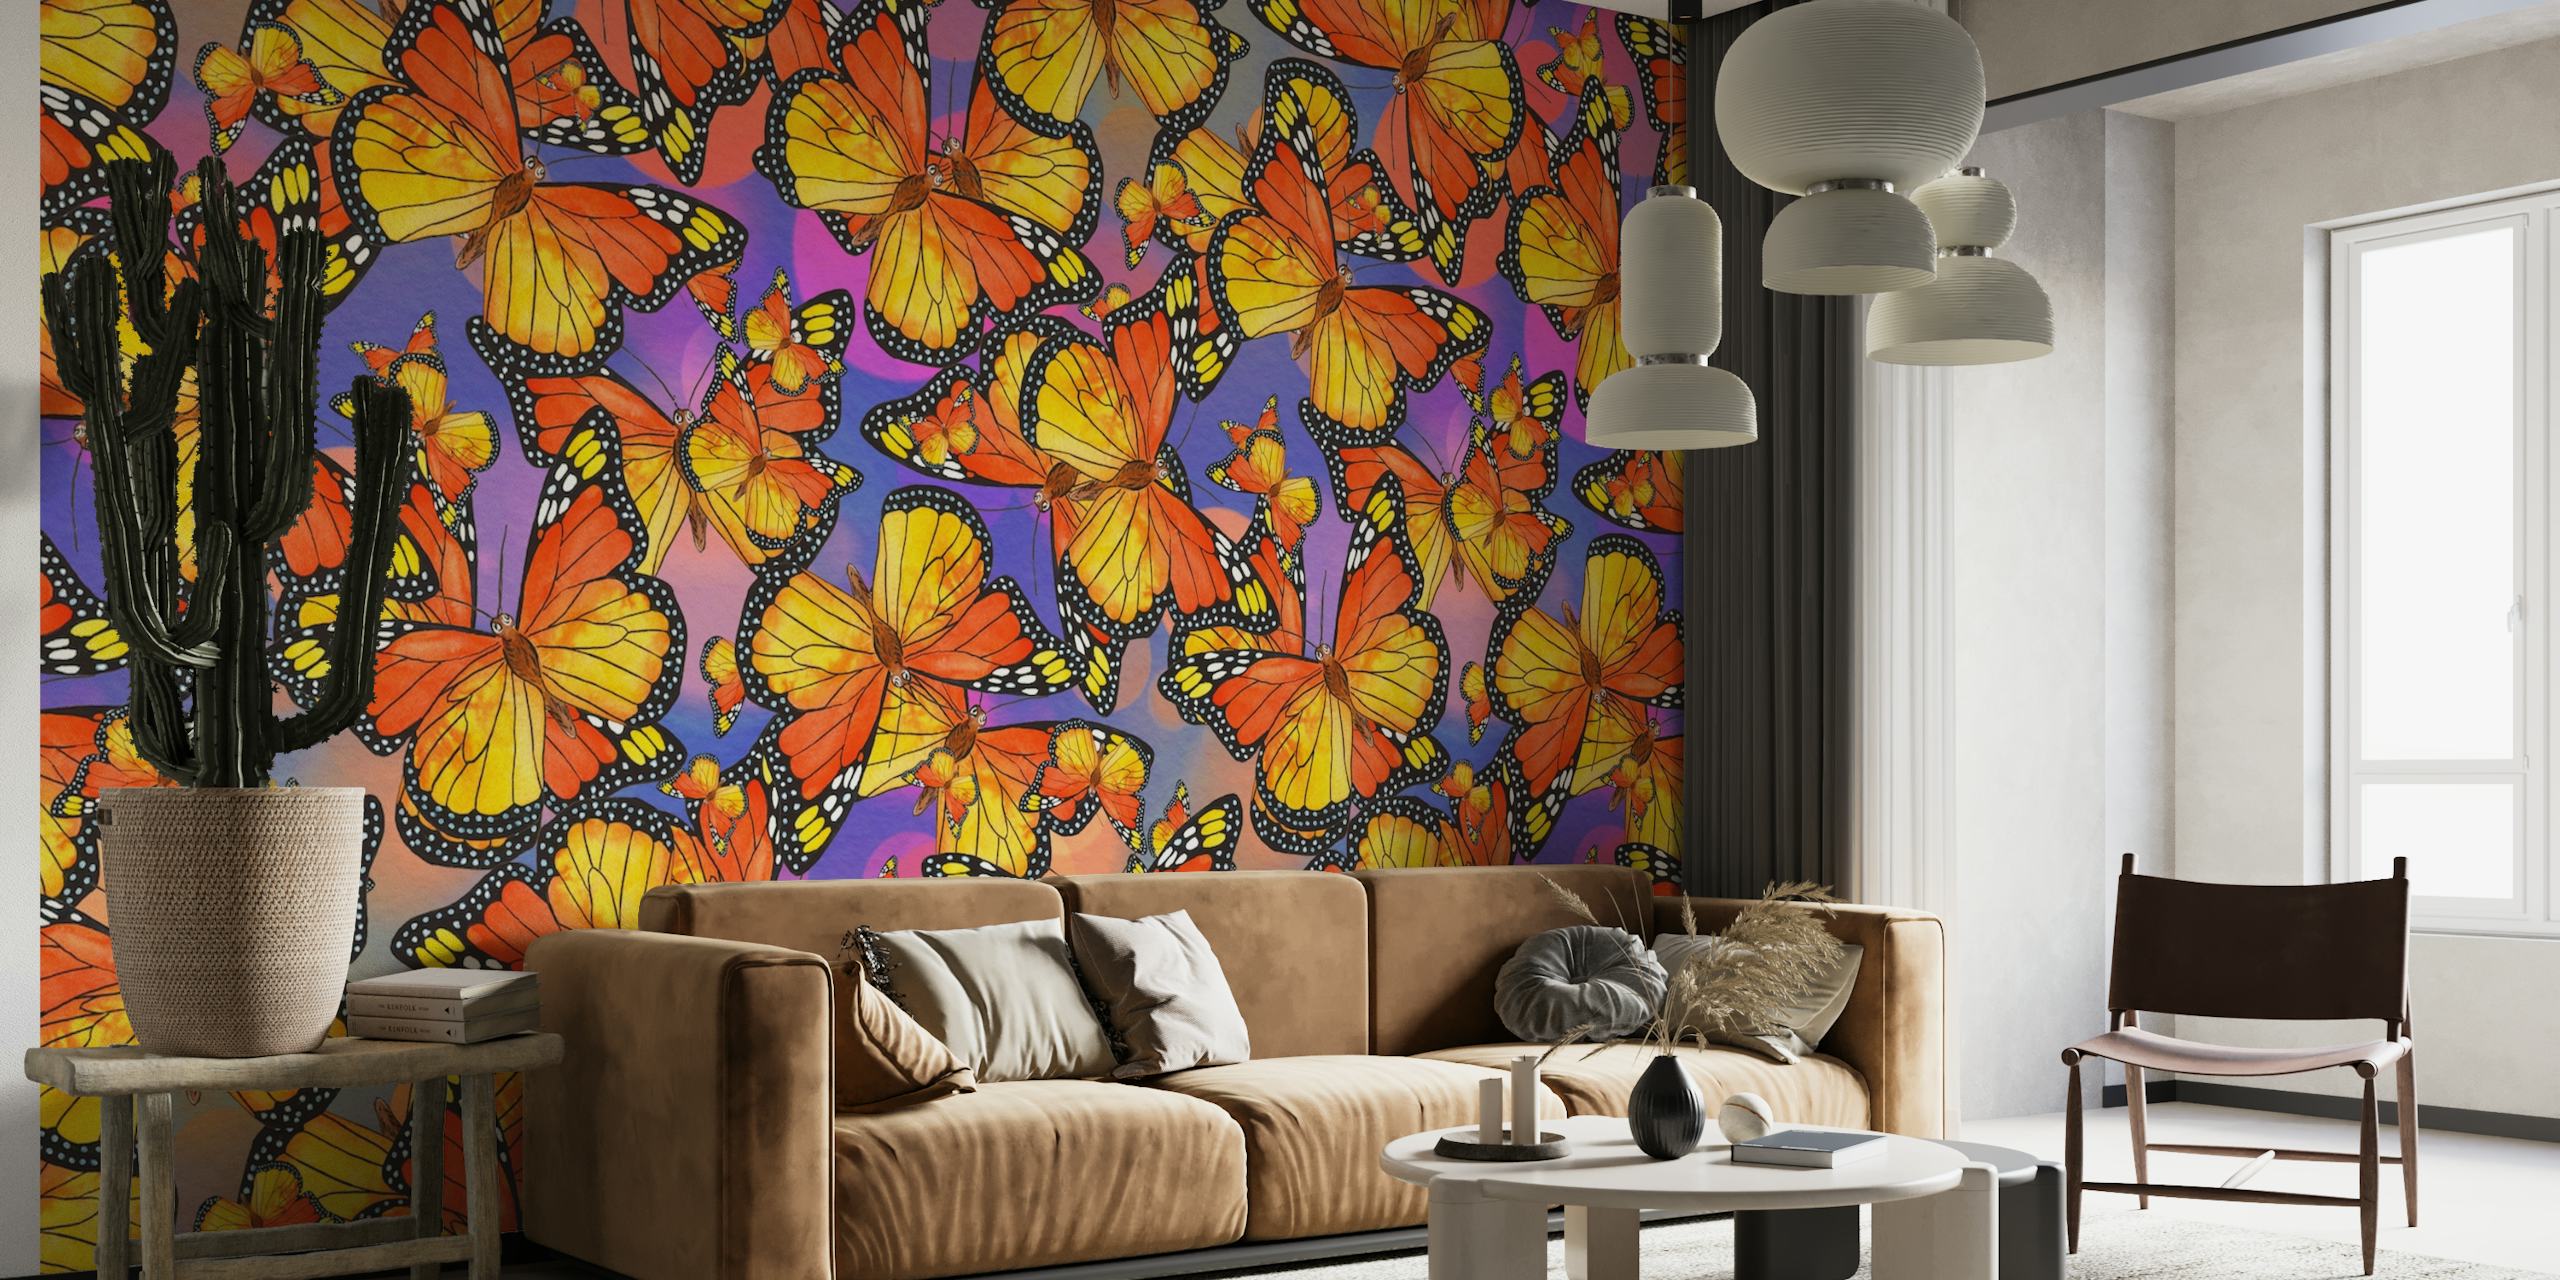 Monarch Butterfly Wall Mural featuring a swarm of orange and black butterflies